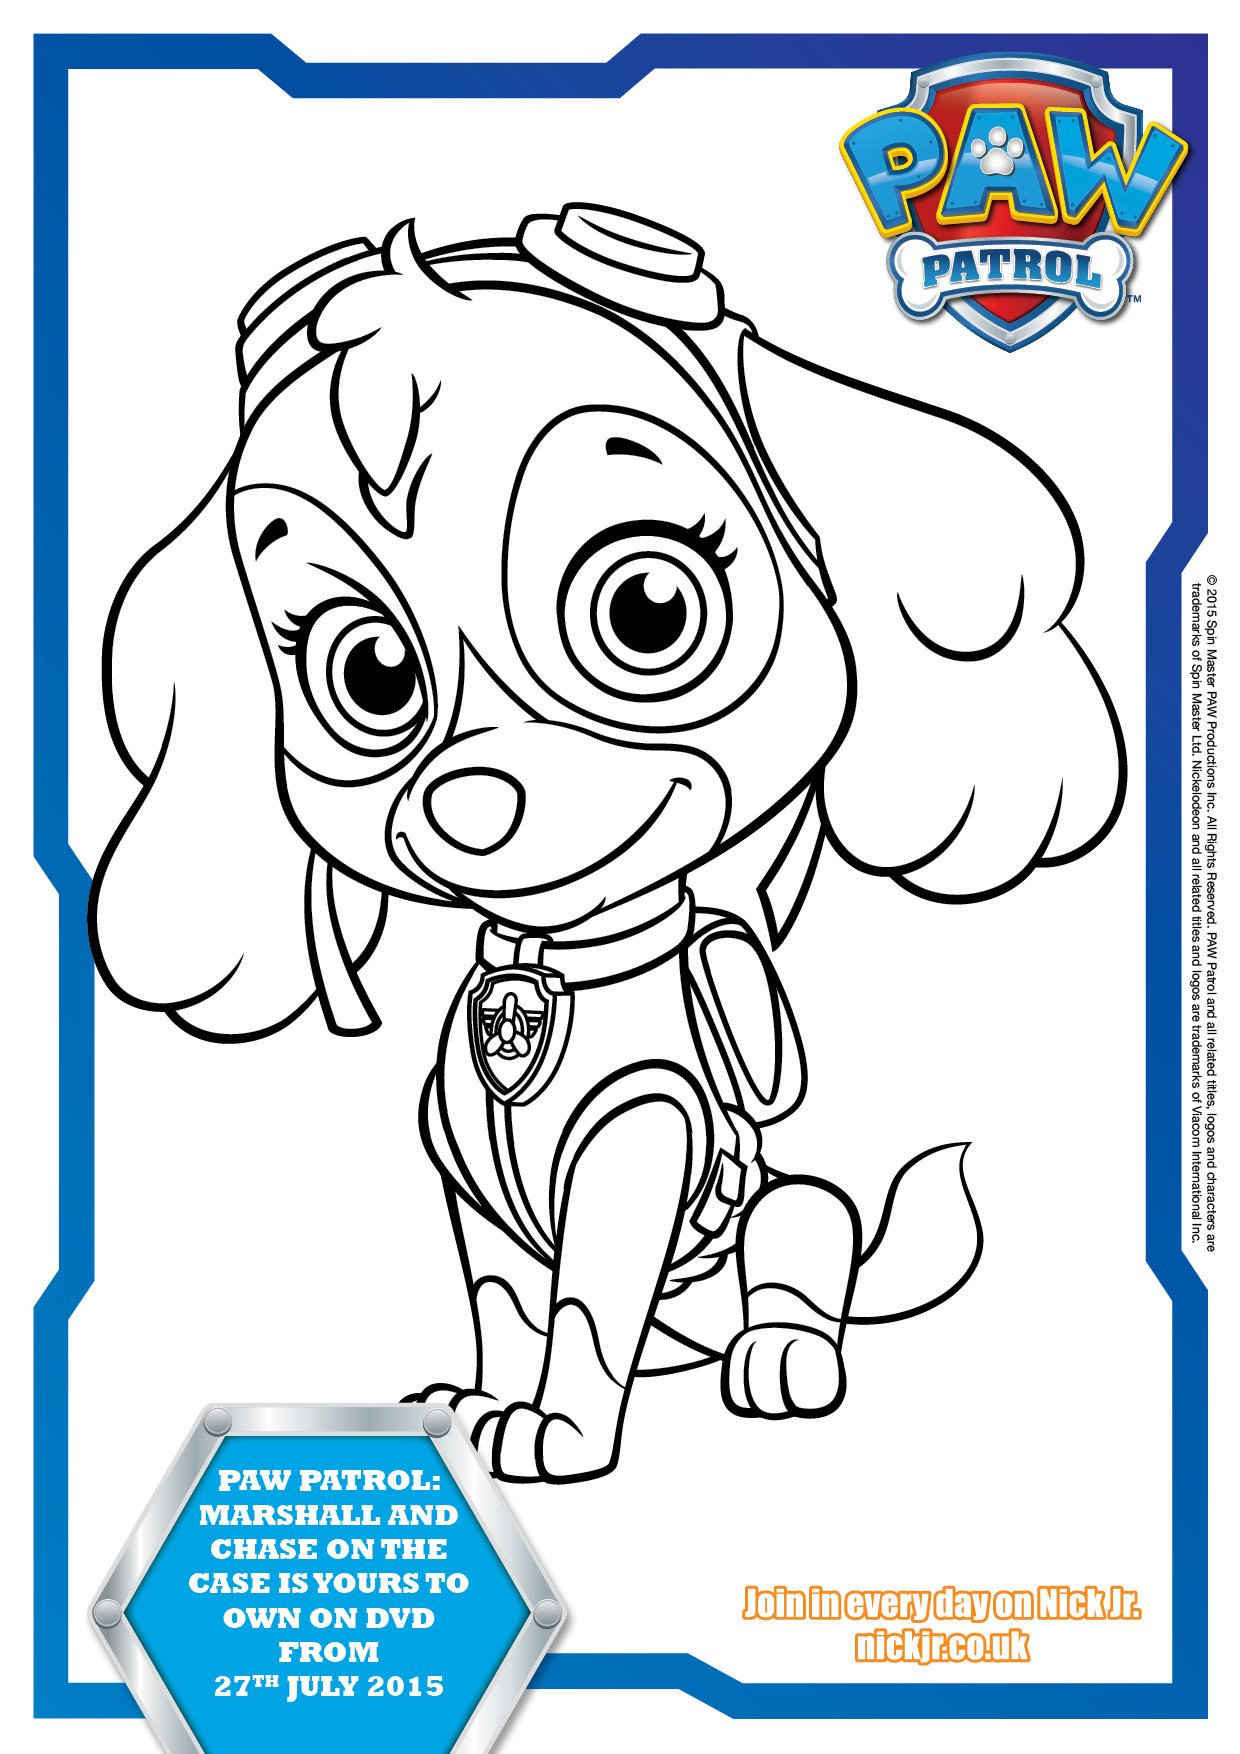 Printable Coloring Pages Paw Patrol
 Paw Patrol Colouring Pages and Activity Sheets In The